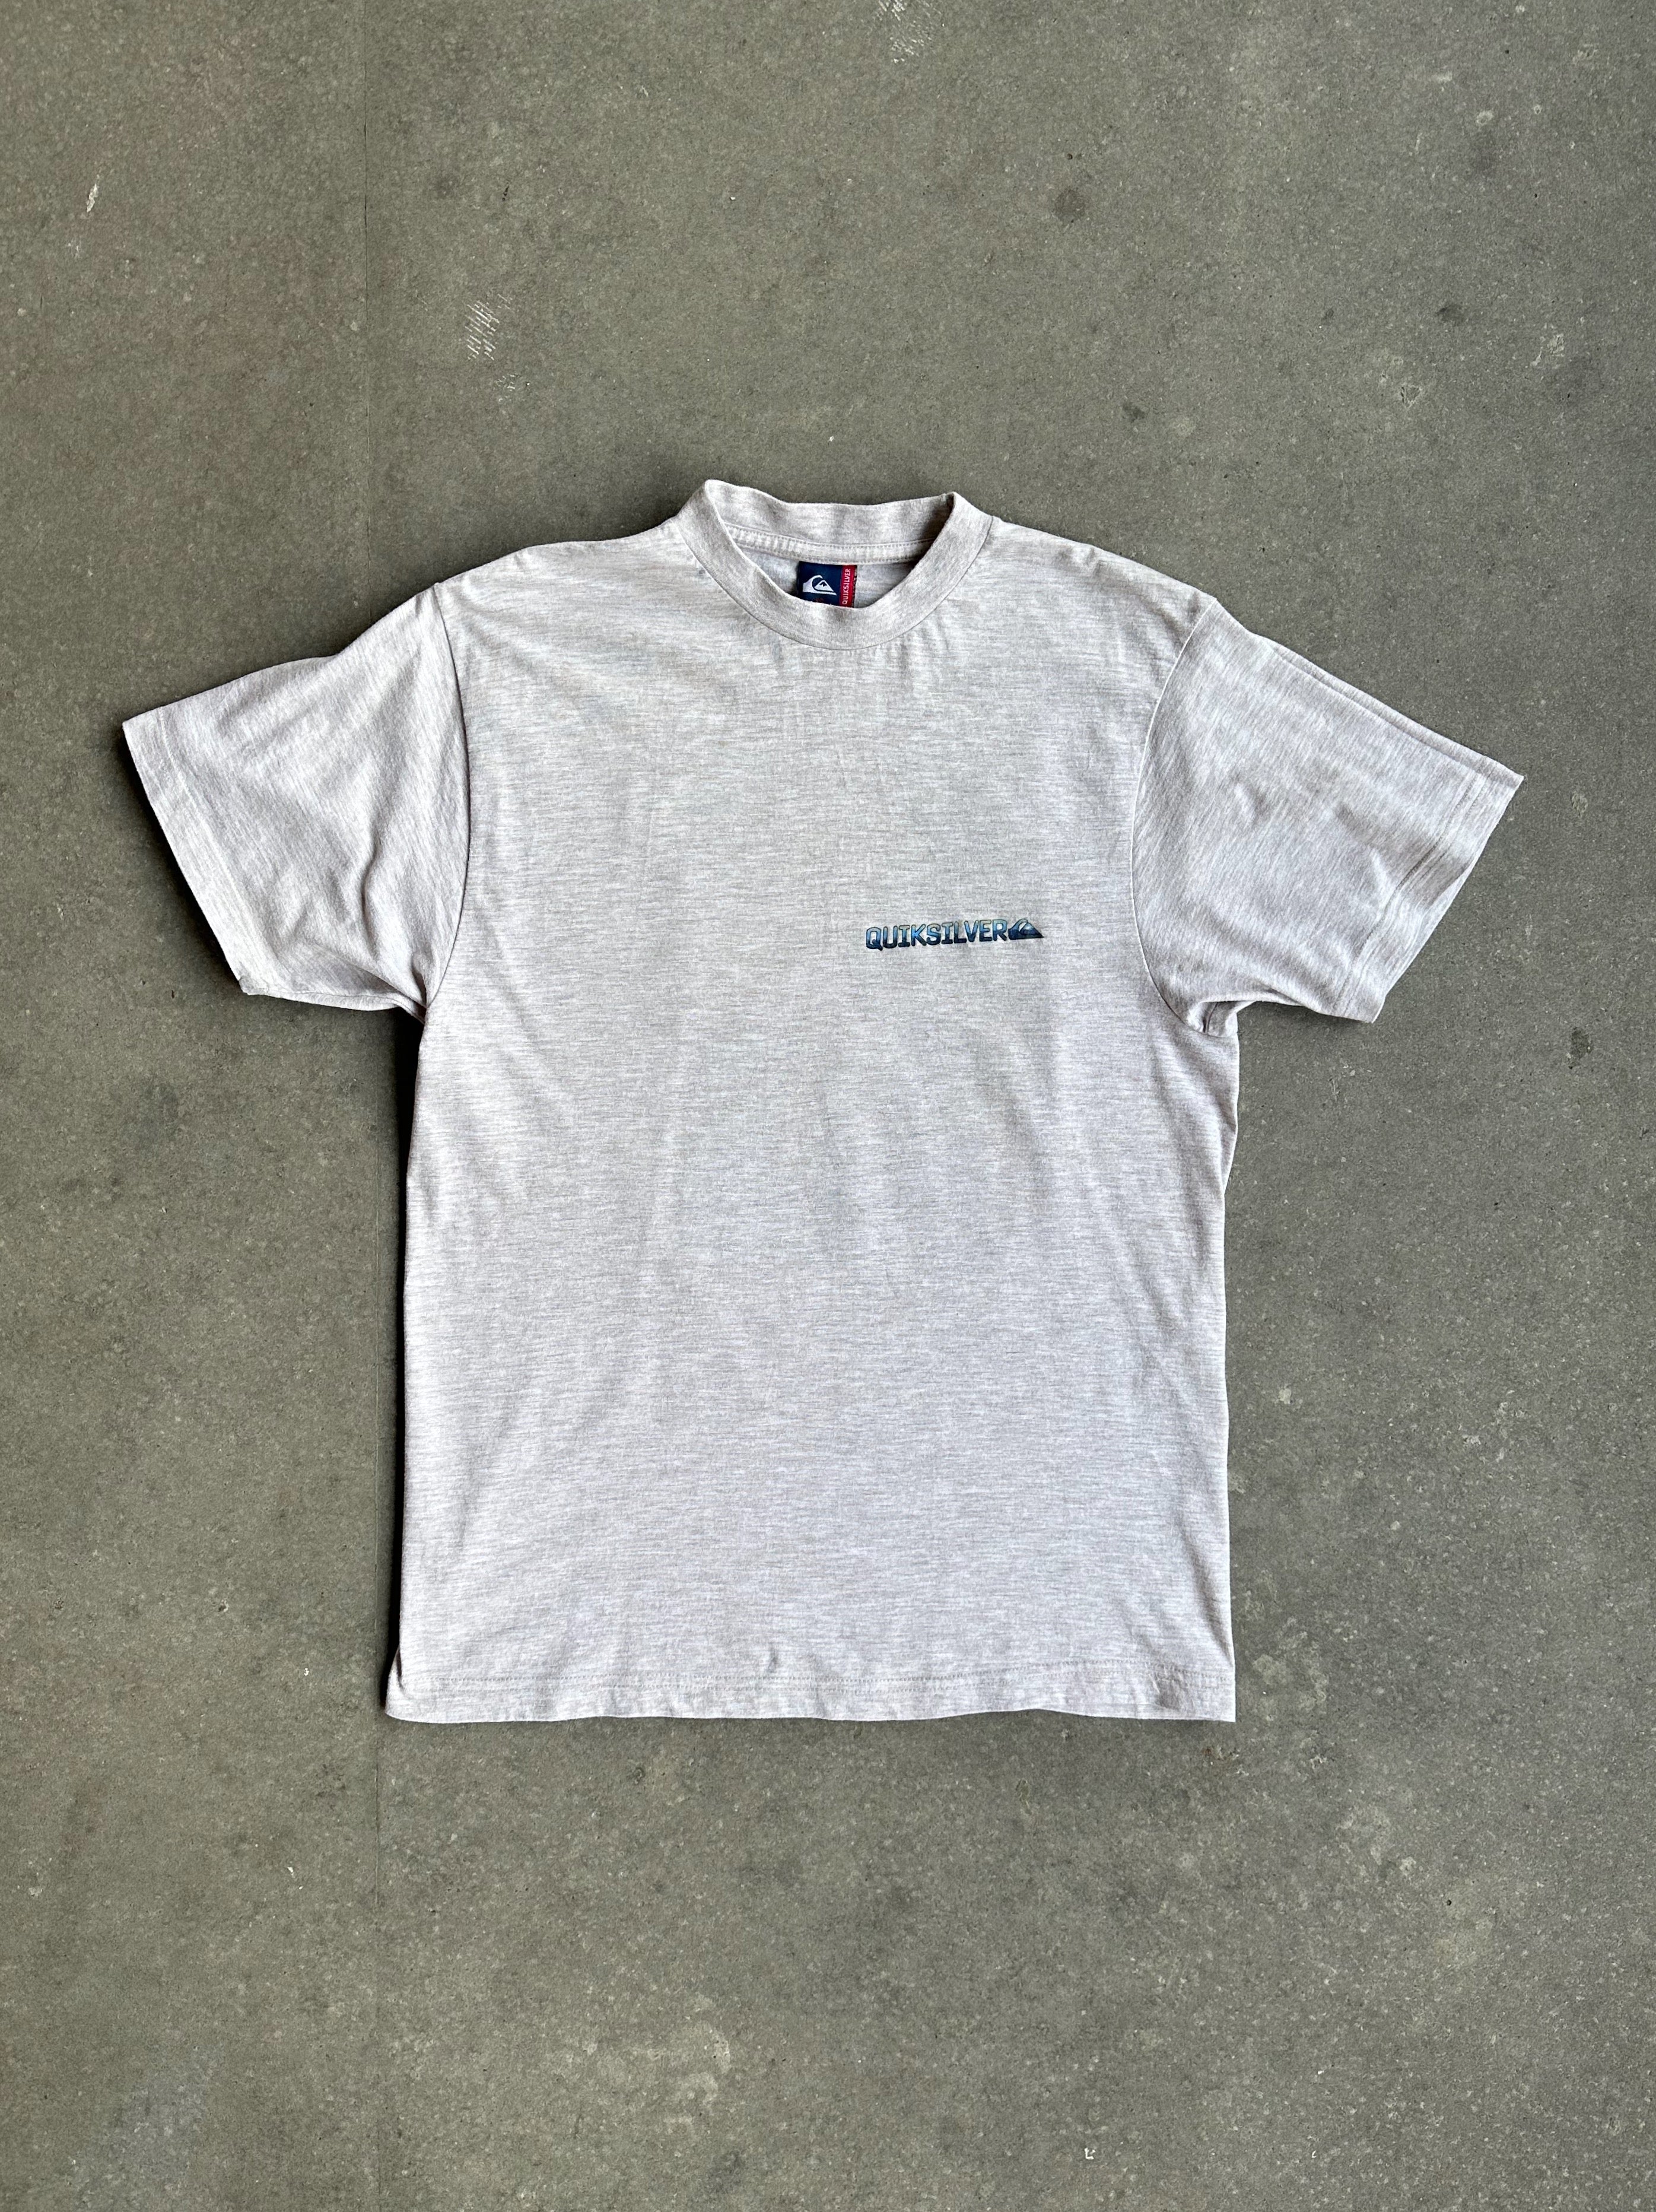 Vintage Single Stitched Quiksilver Tee - Extra Small/Small